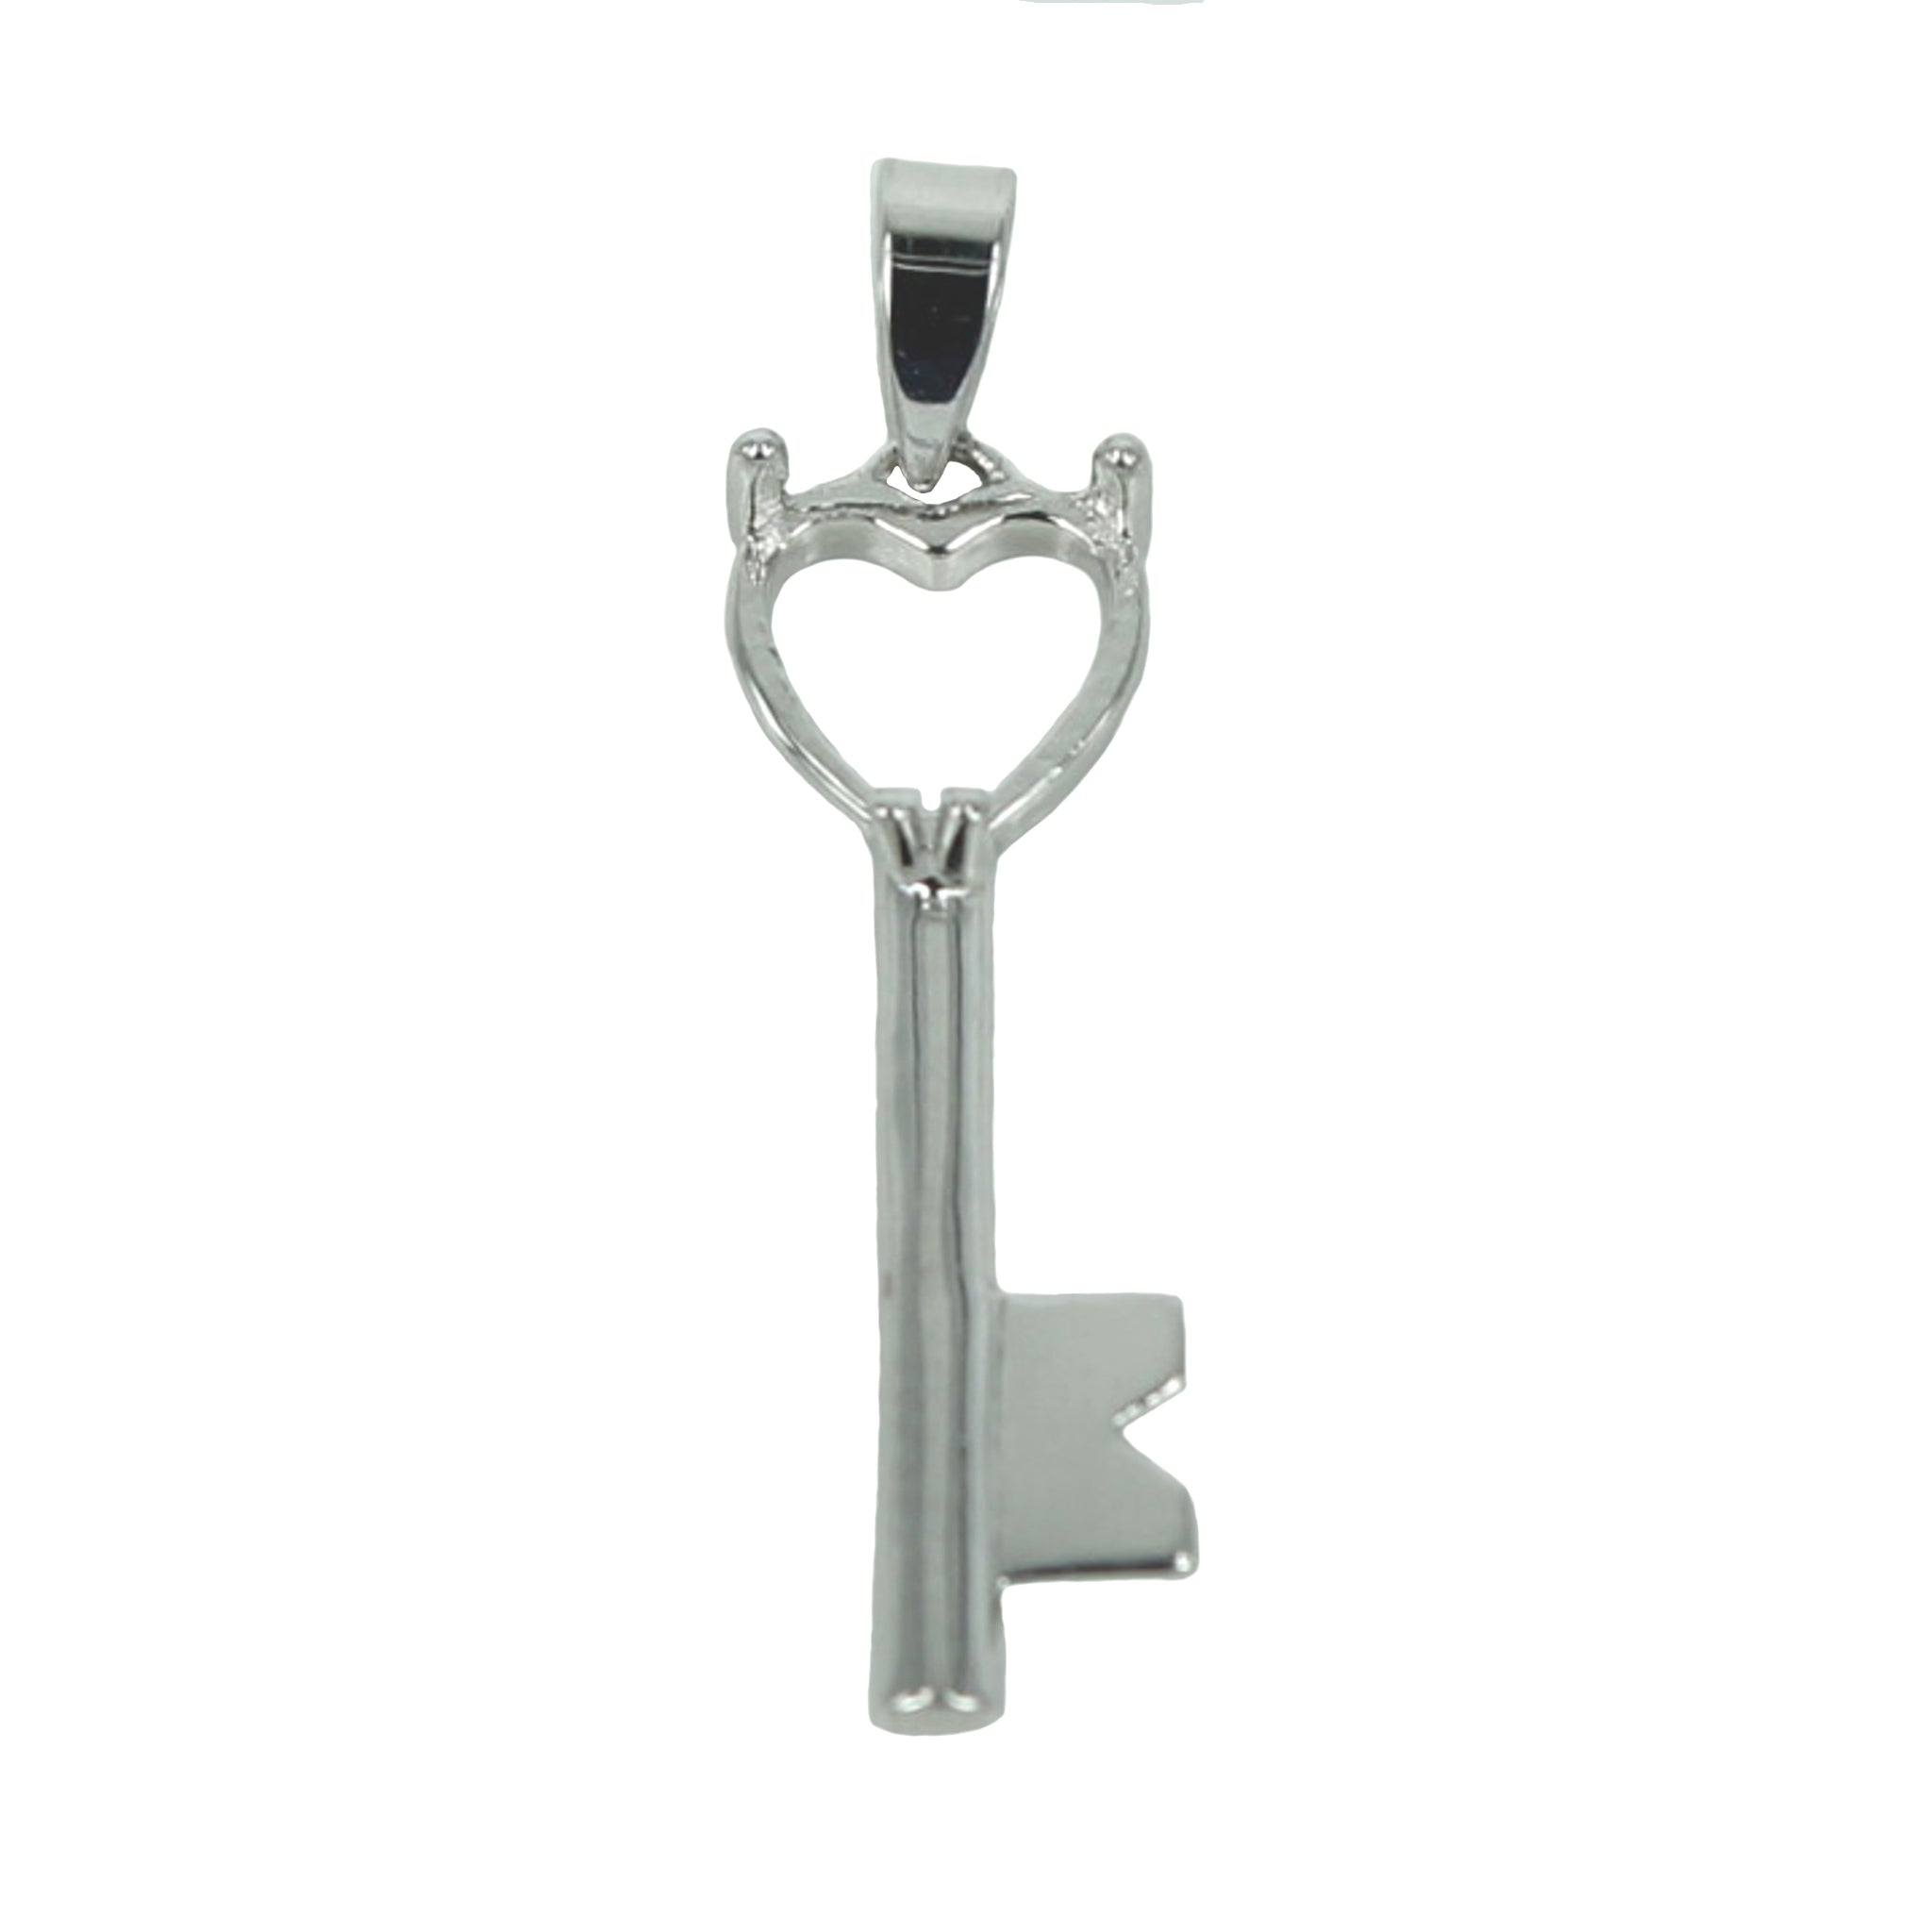 Heart Key Flourish Pendant with Soldered Loop and Bail in Sterling Silver 8mm